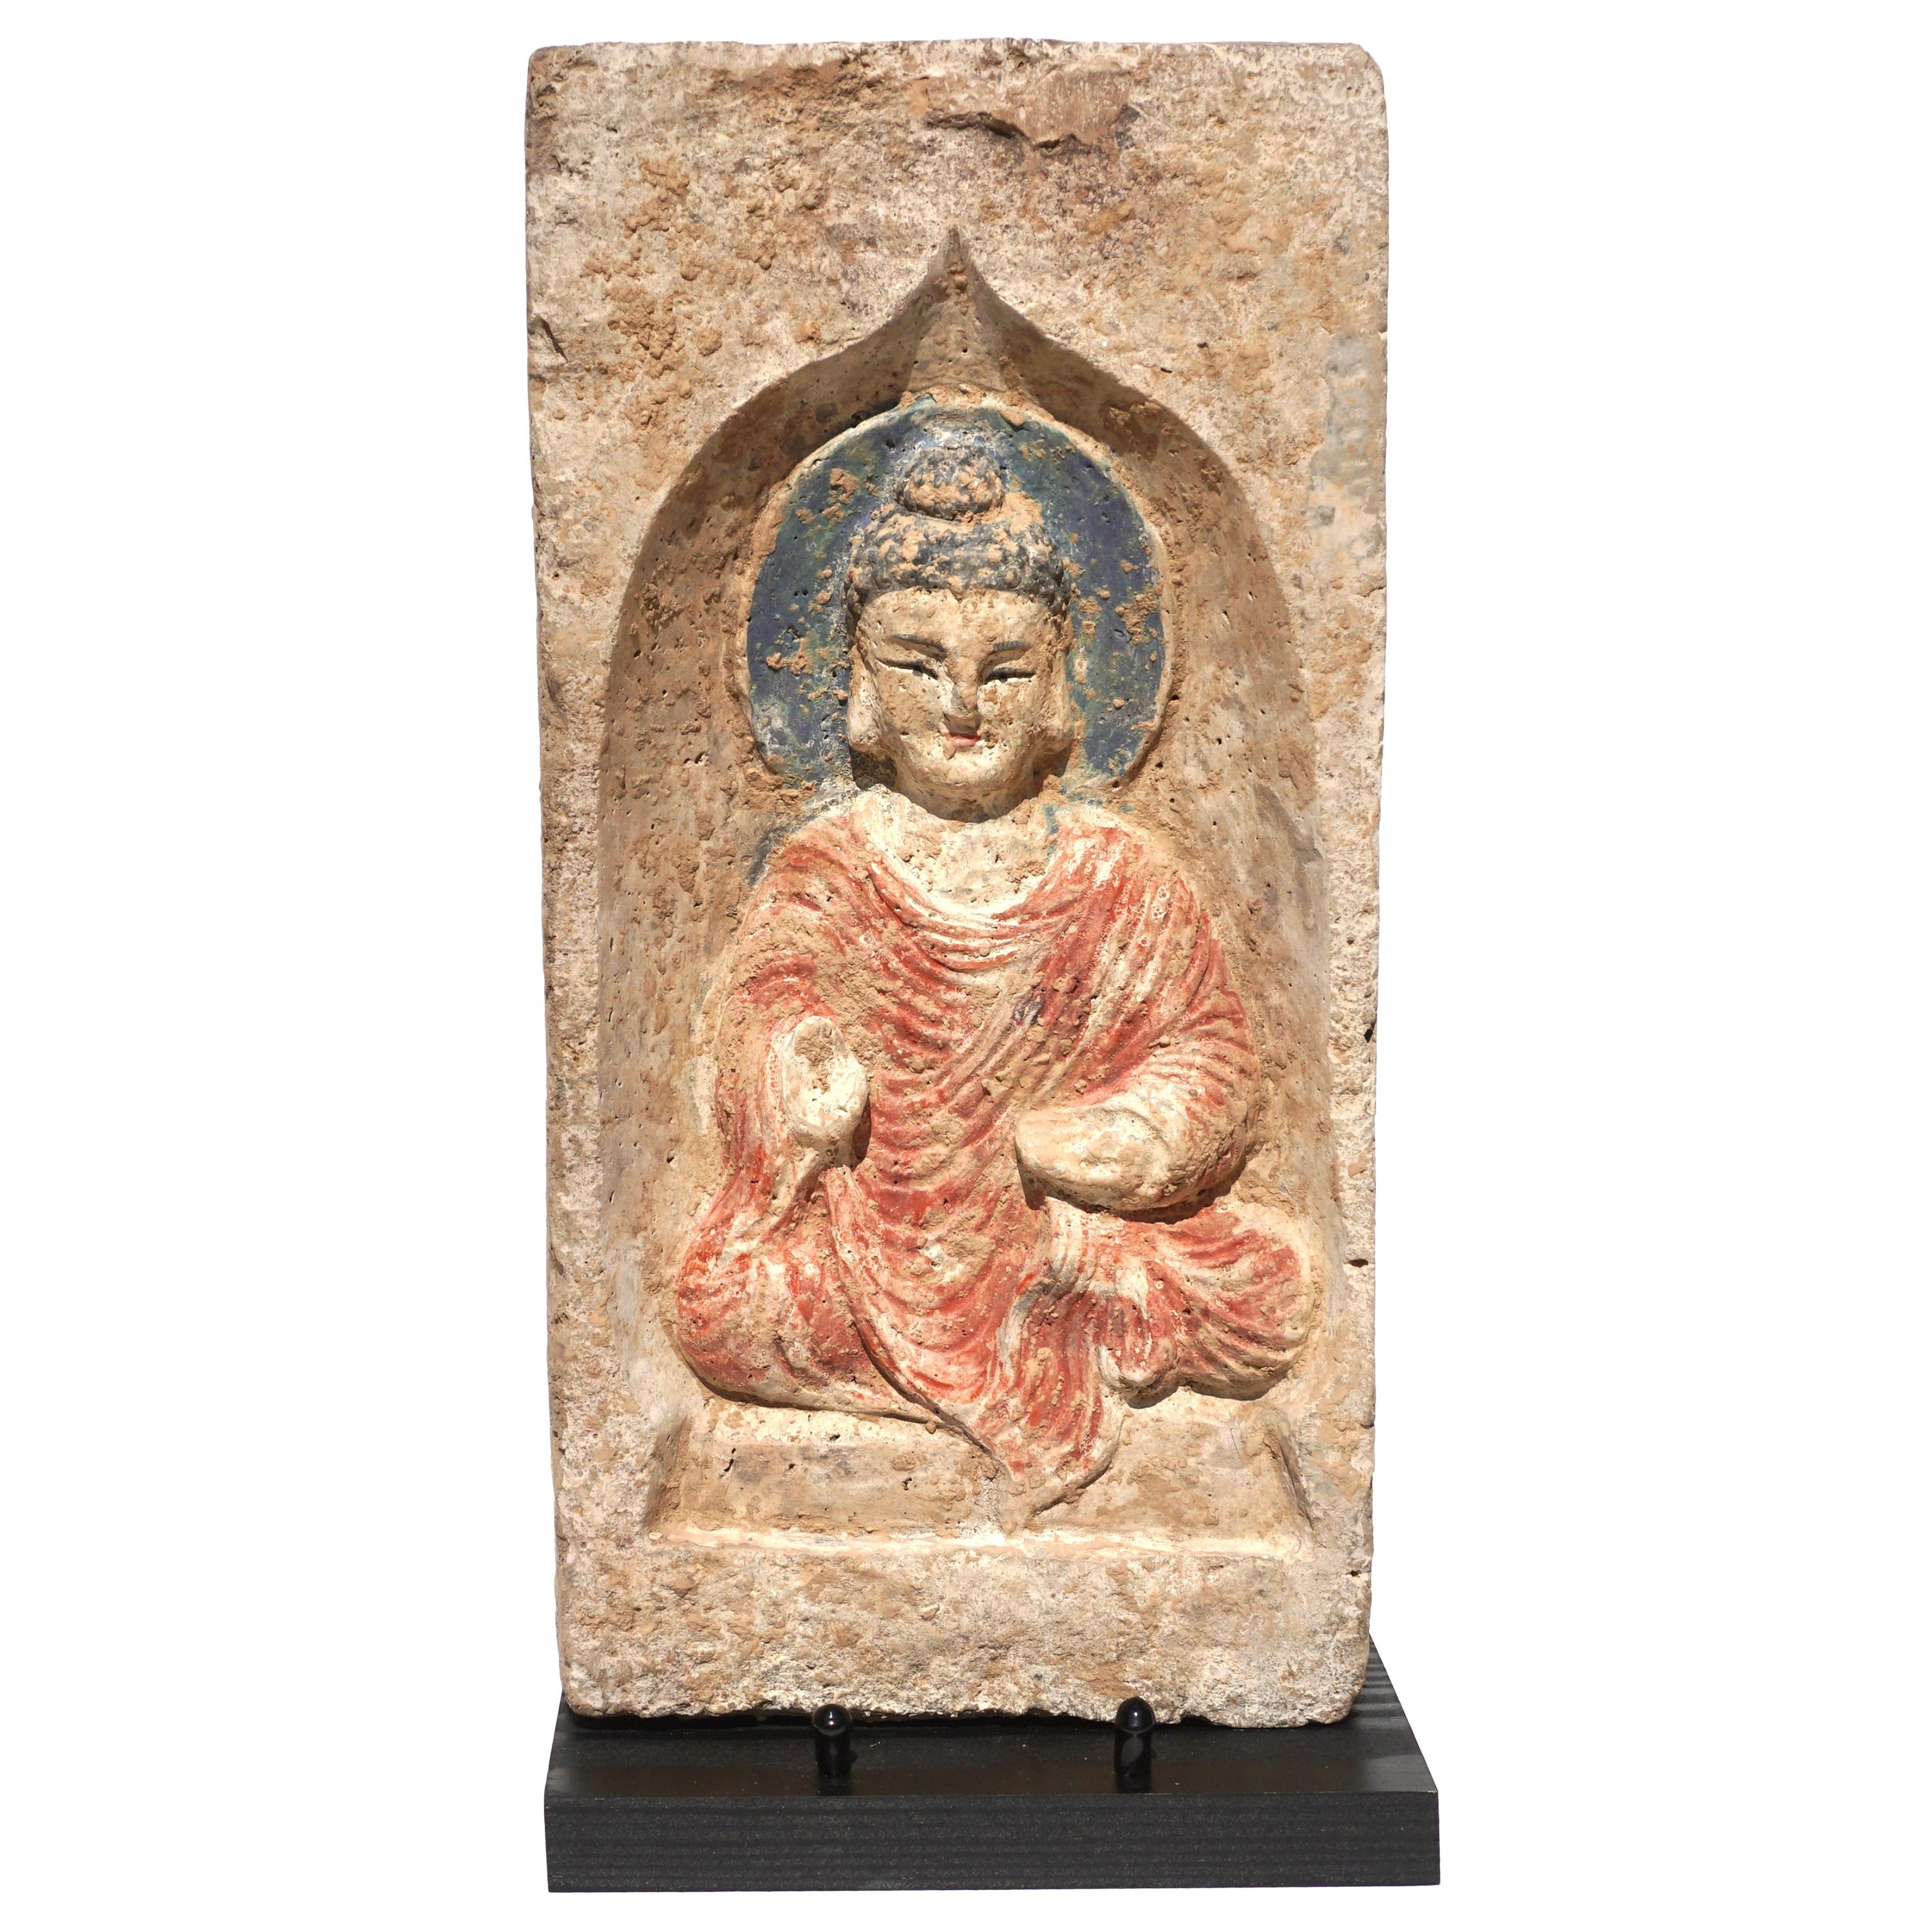 Northern Wei Dynasty Terracotta Sculpture of Buddha 386-534 AD For Sale